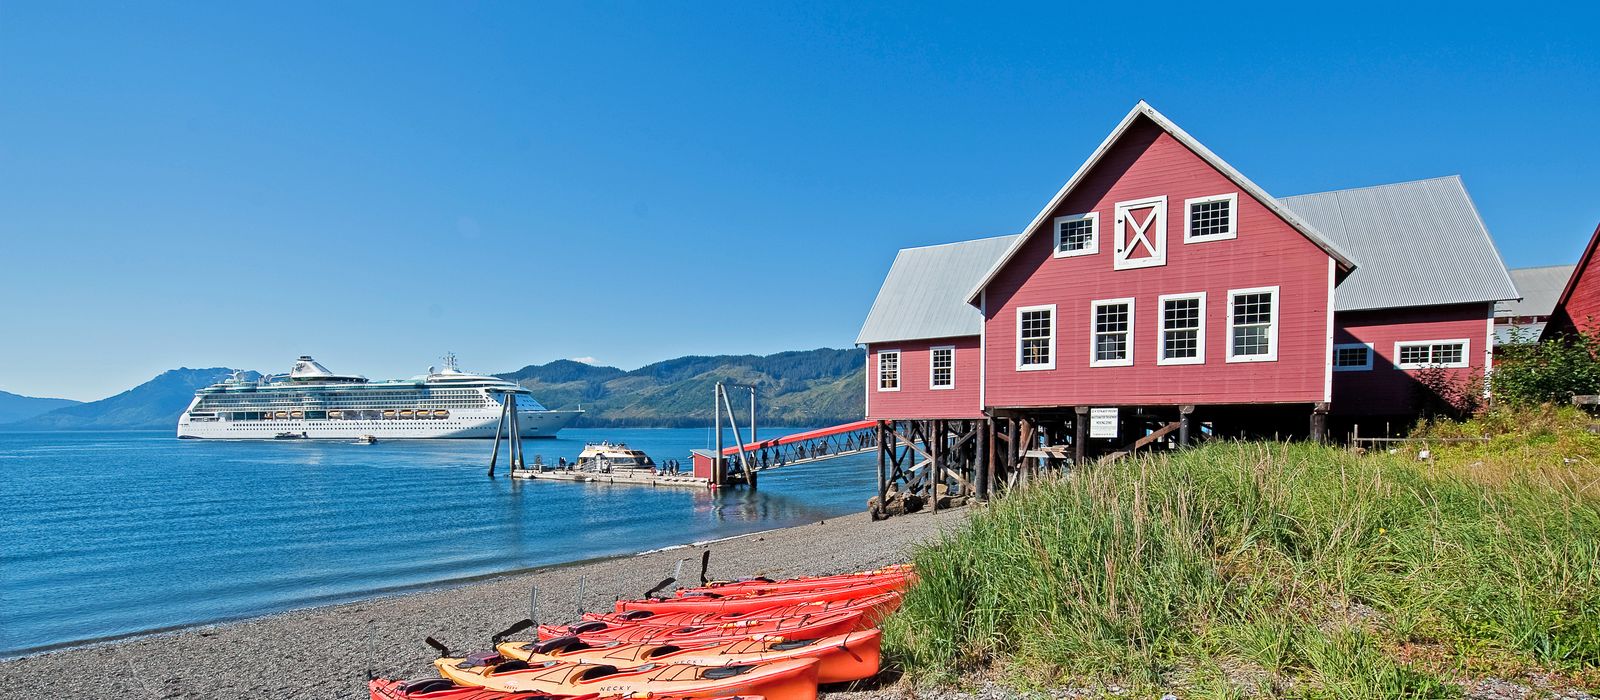 Cannery building in Hoonah am Icy Strait Point